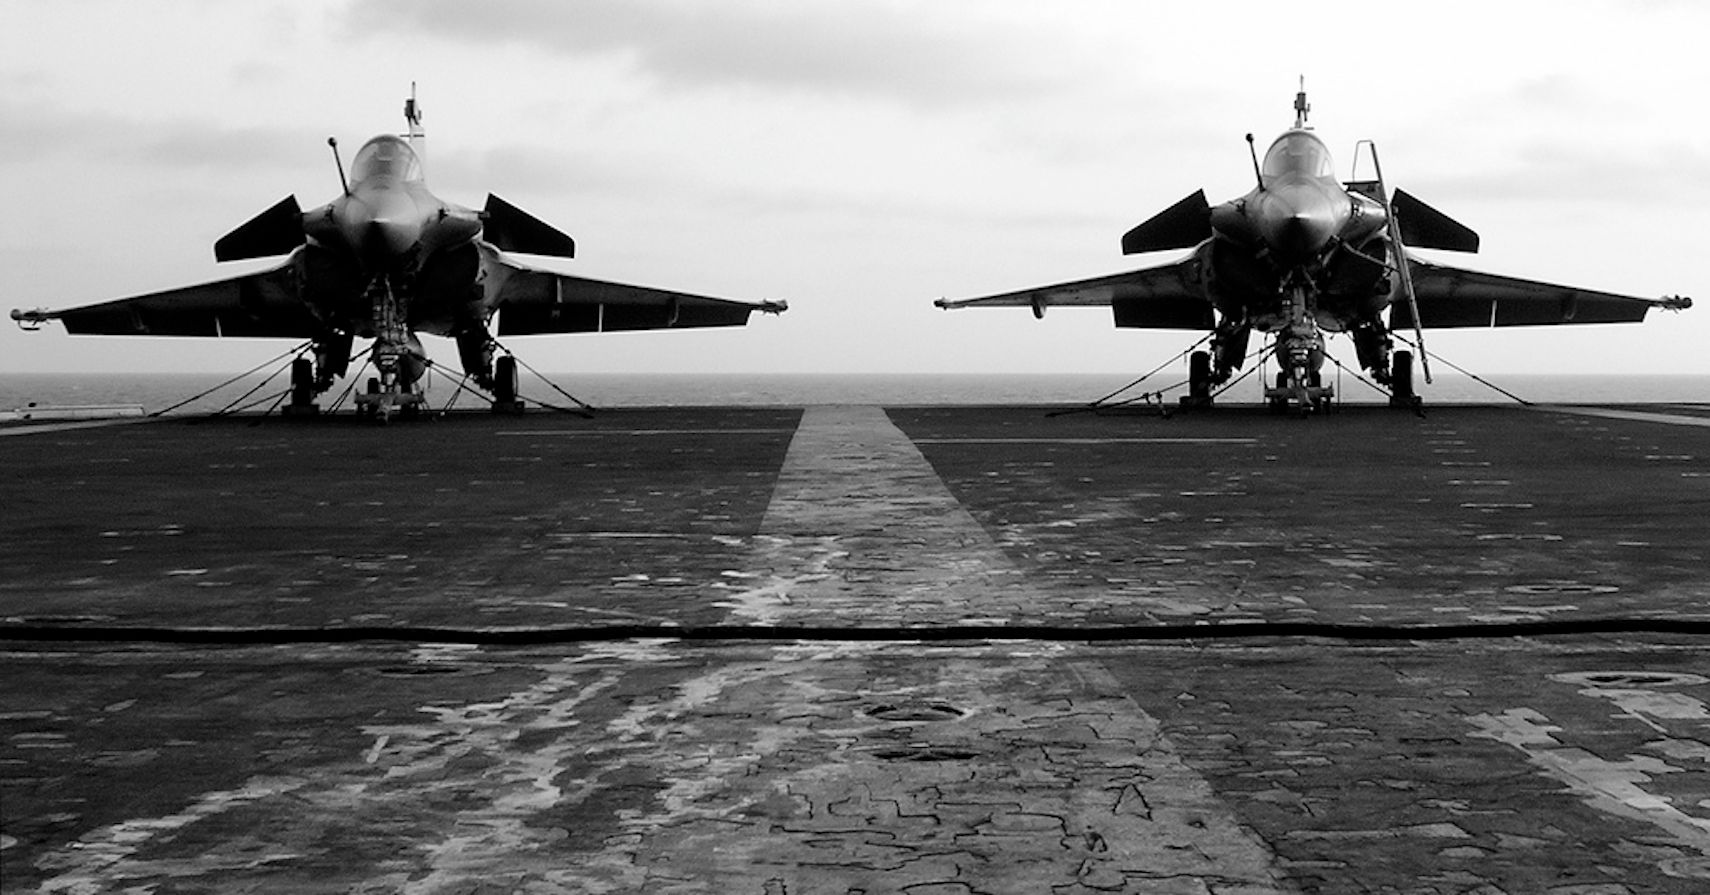 Rafale Vs F-18 Vs F-35: The Best Aircraft Carrier Fighter Jets Compared